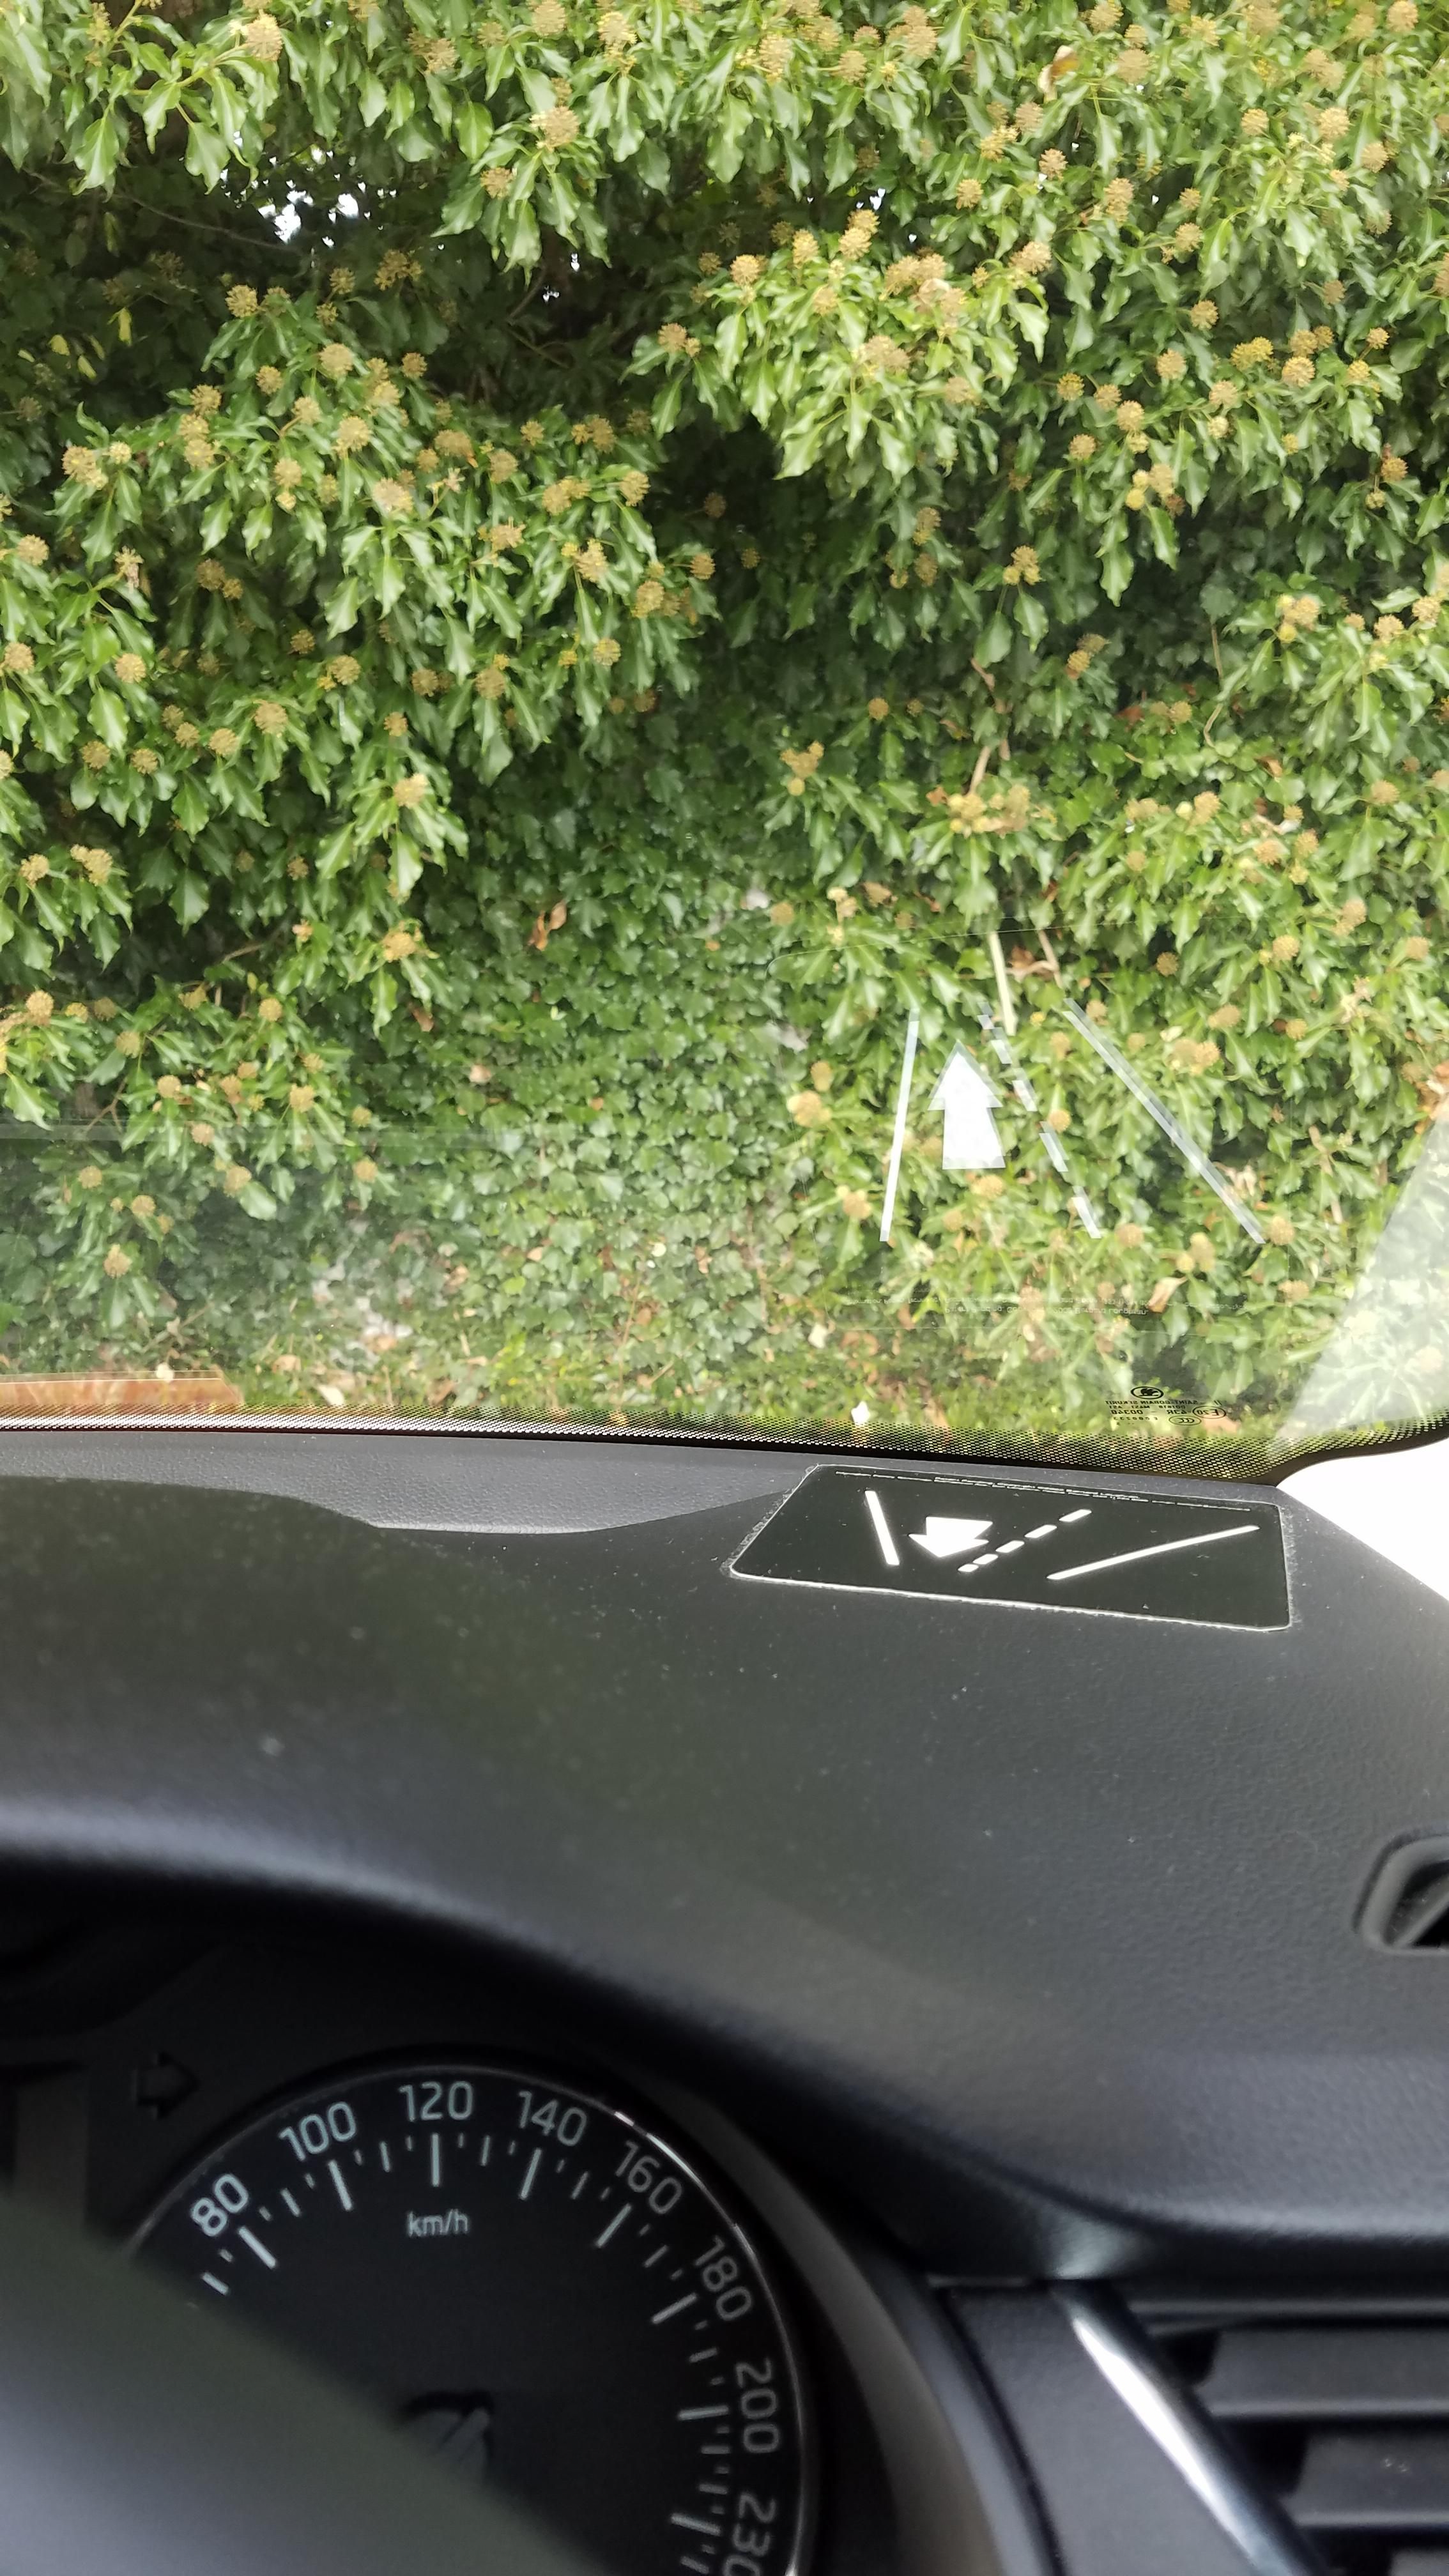 Rental car in Ireland has dashboard sticker that reflects in the windshield to remind you what side of the road to drive on.